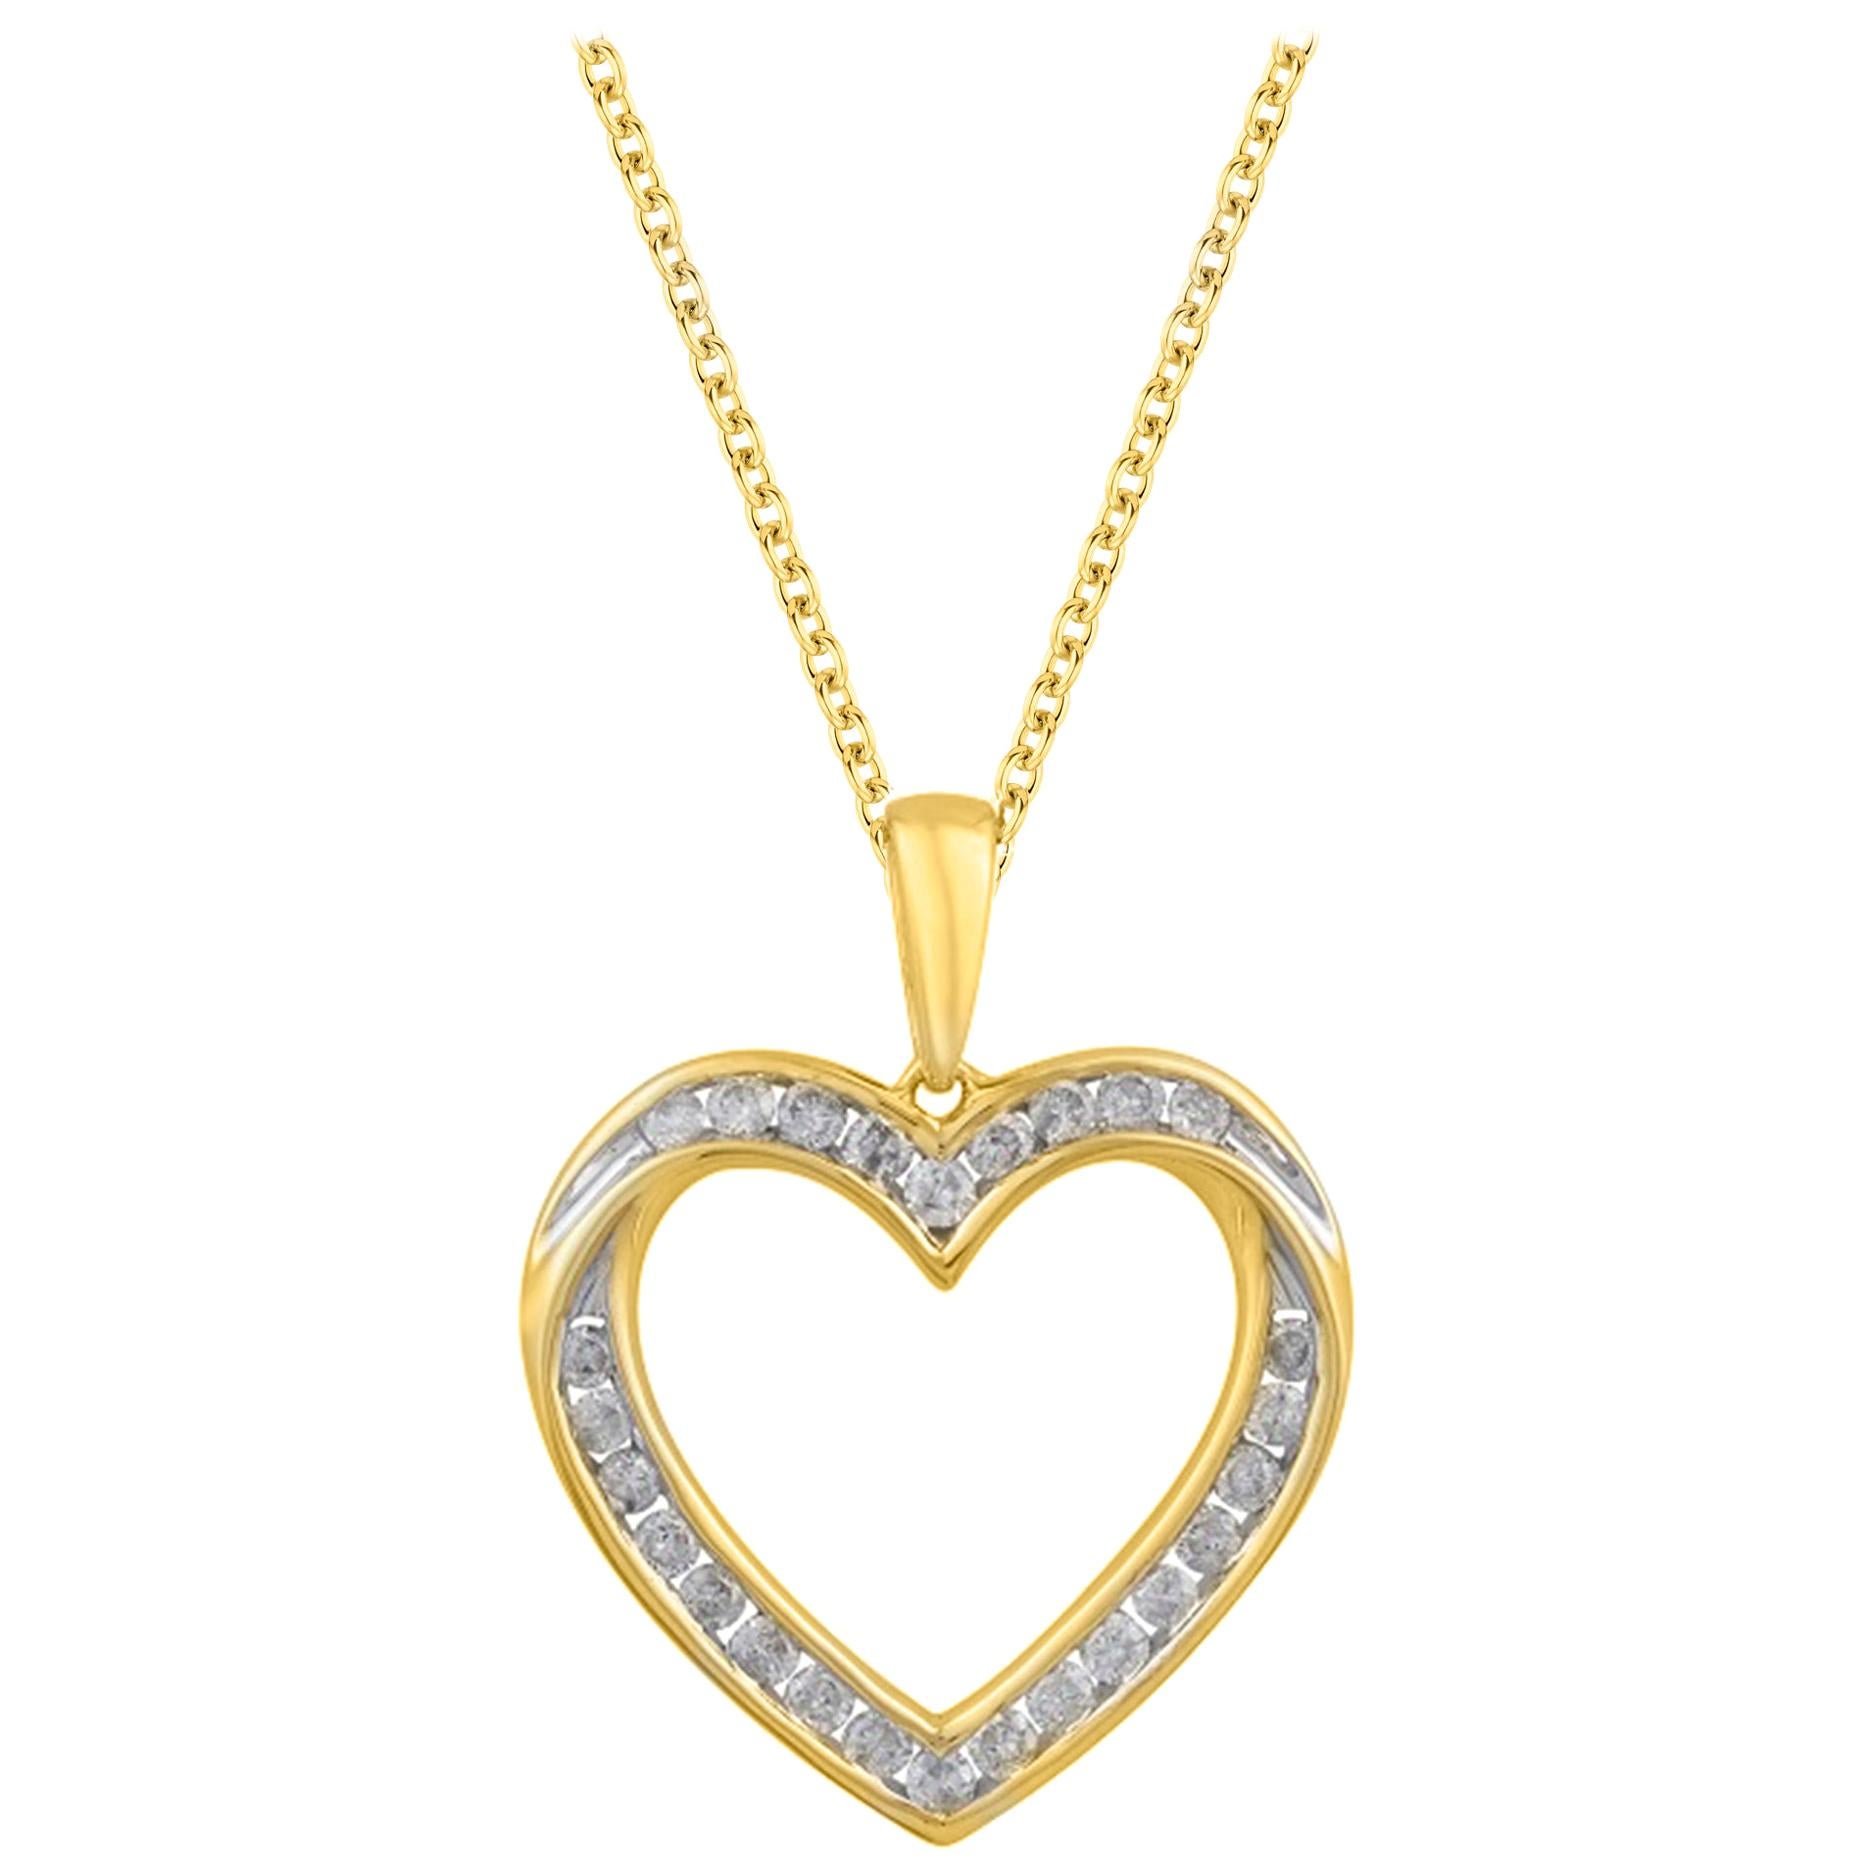 TJD 0.50 Carat Diamond 14 Karat Yellow Gold Heart Pendant with 18 inch chain For Sale